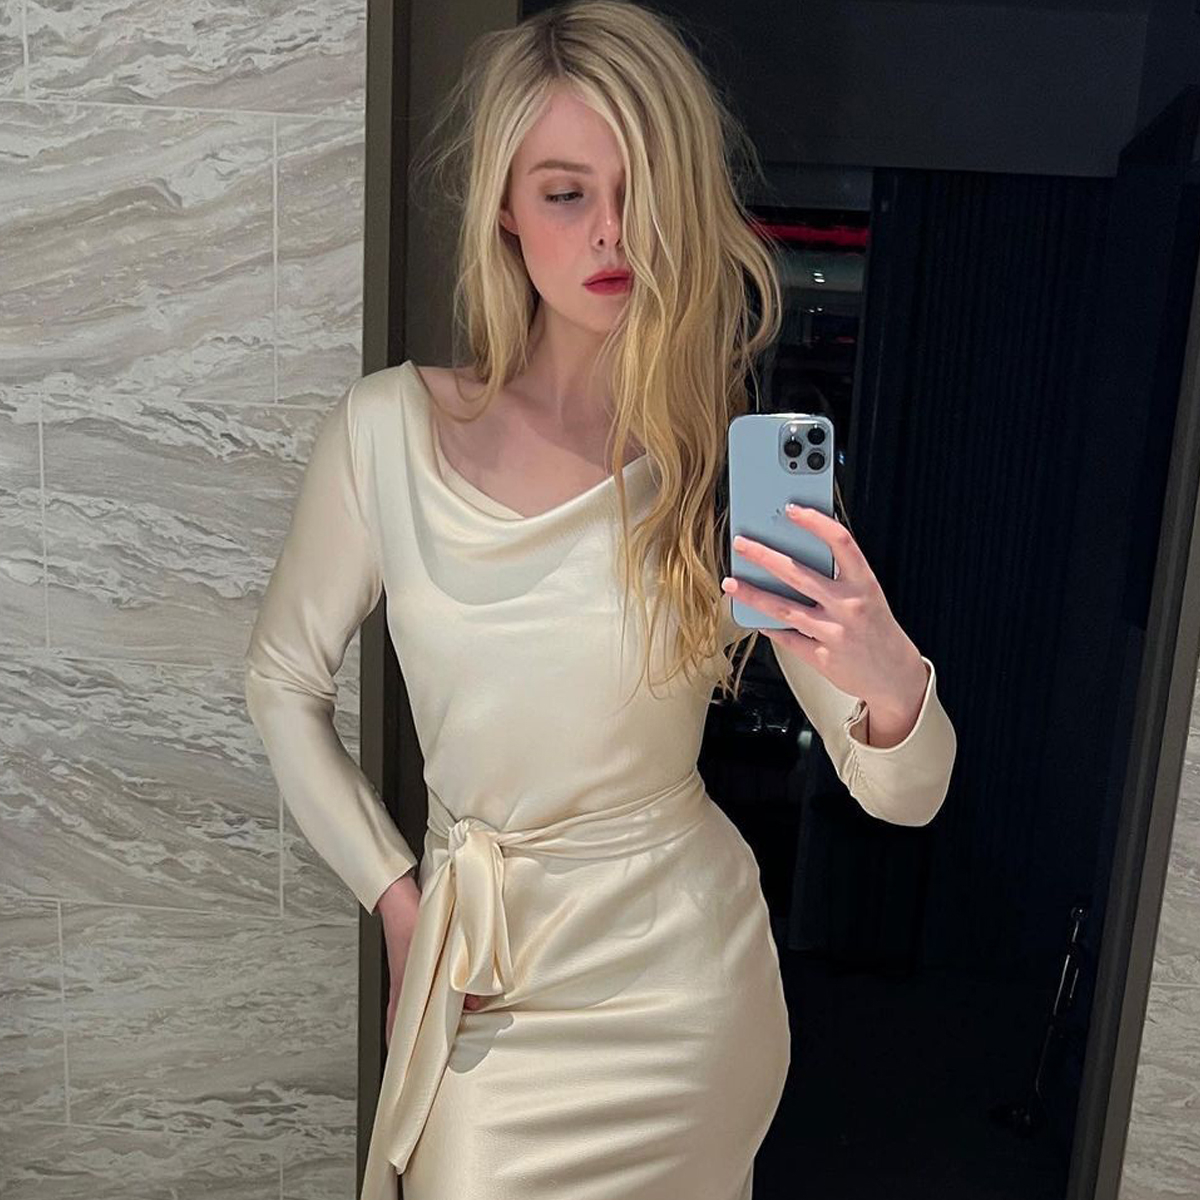 Elle Fanning News, Pictures, and Videos - E! Online